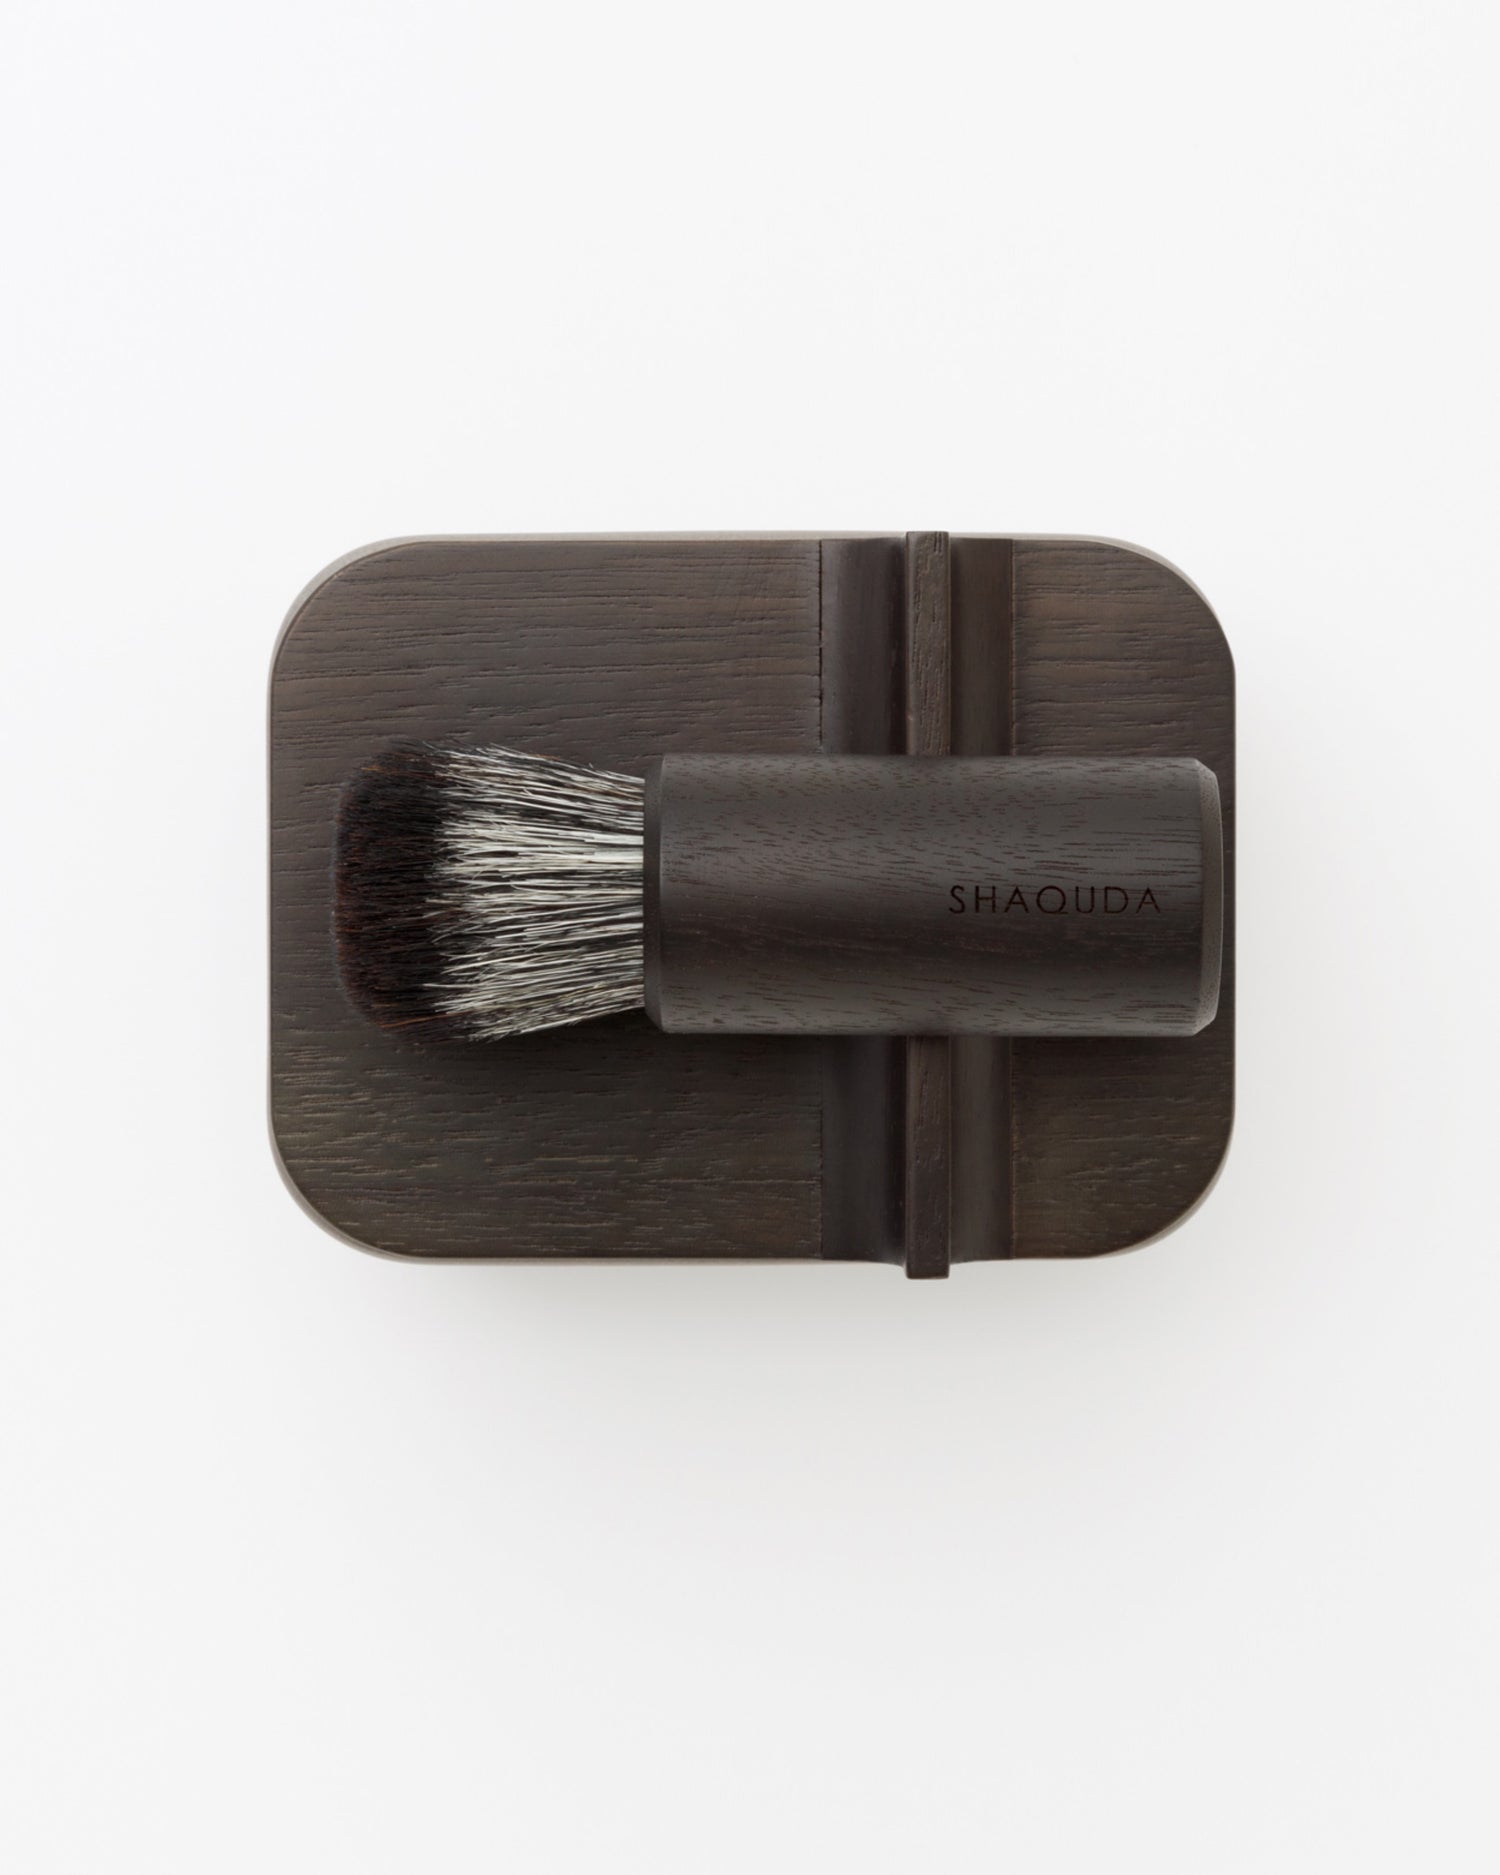 Bird's-eye-view of hard Jiva face cleansing and shaving series with walnut, boar bristle, and goat hair brush on top of porcelain bowl by Shaquda against white-gray background. 